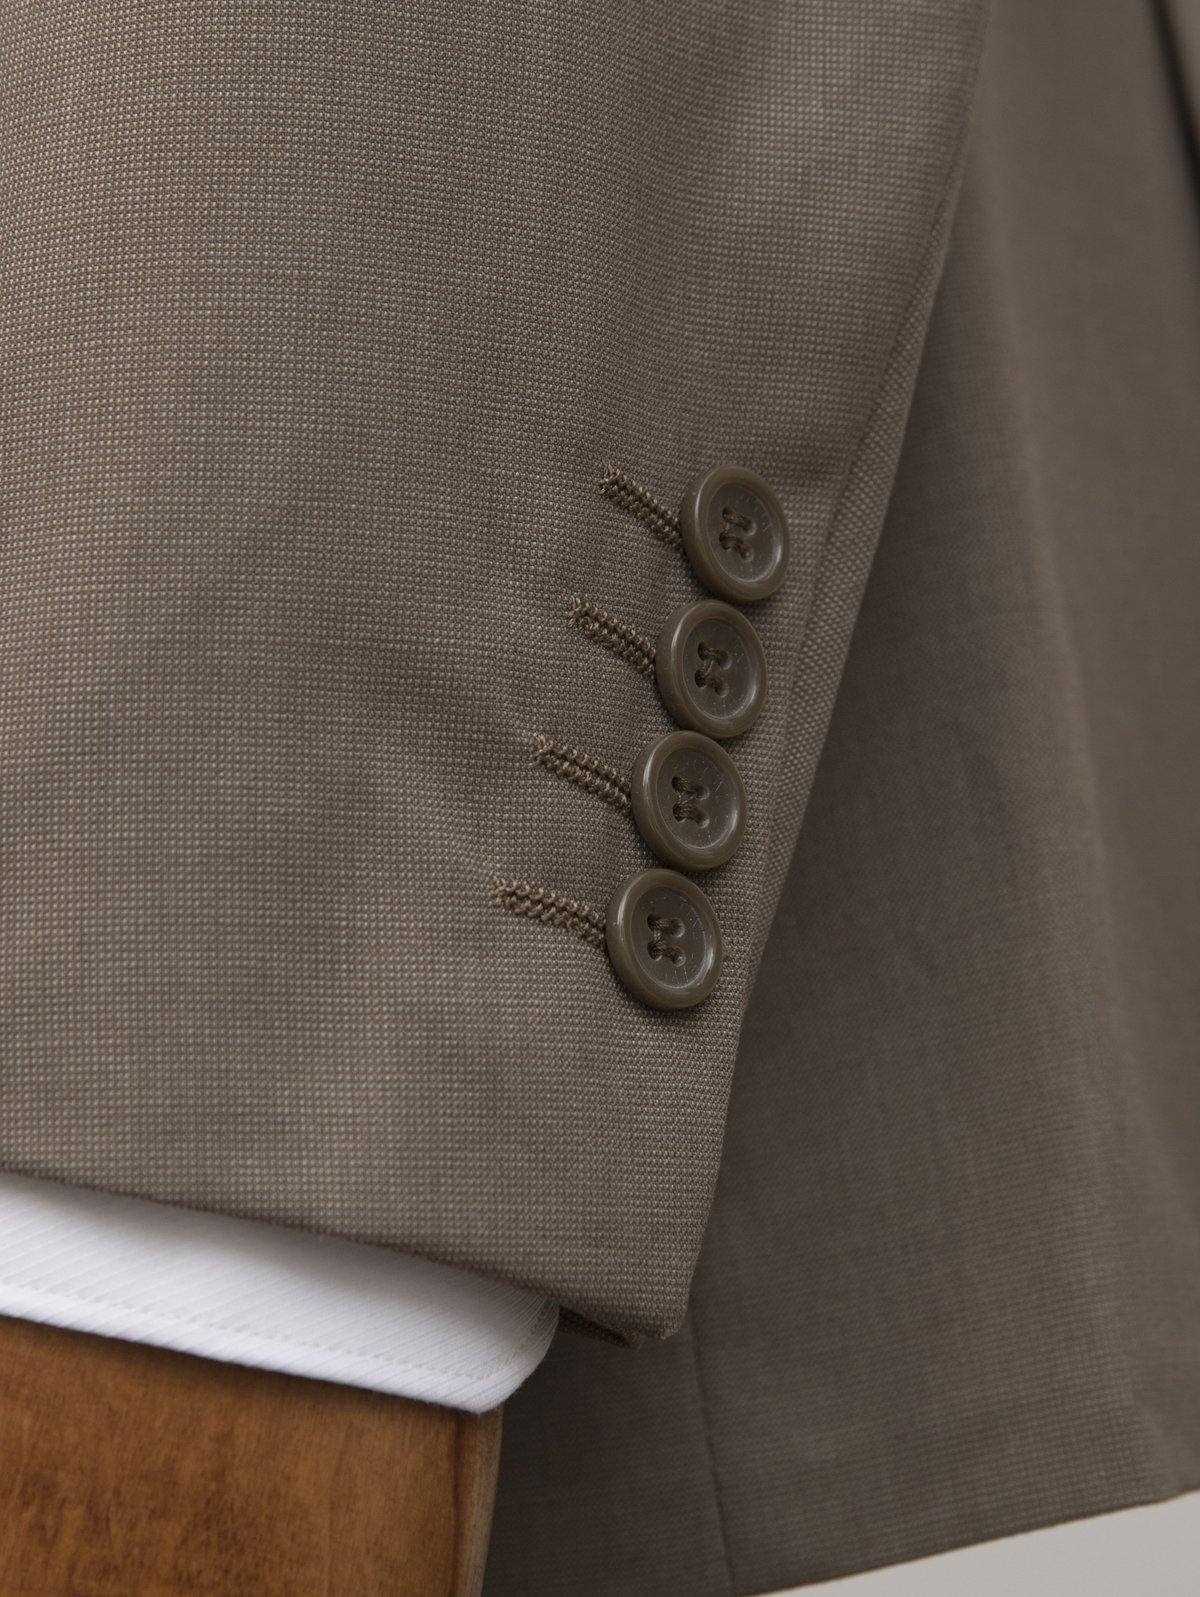 2 PIECE SUIT LIGHT BROWN at Charcoal Clothing